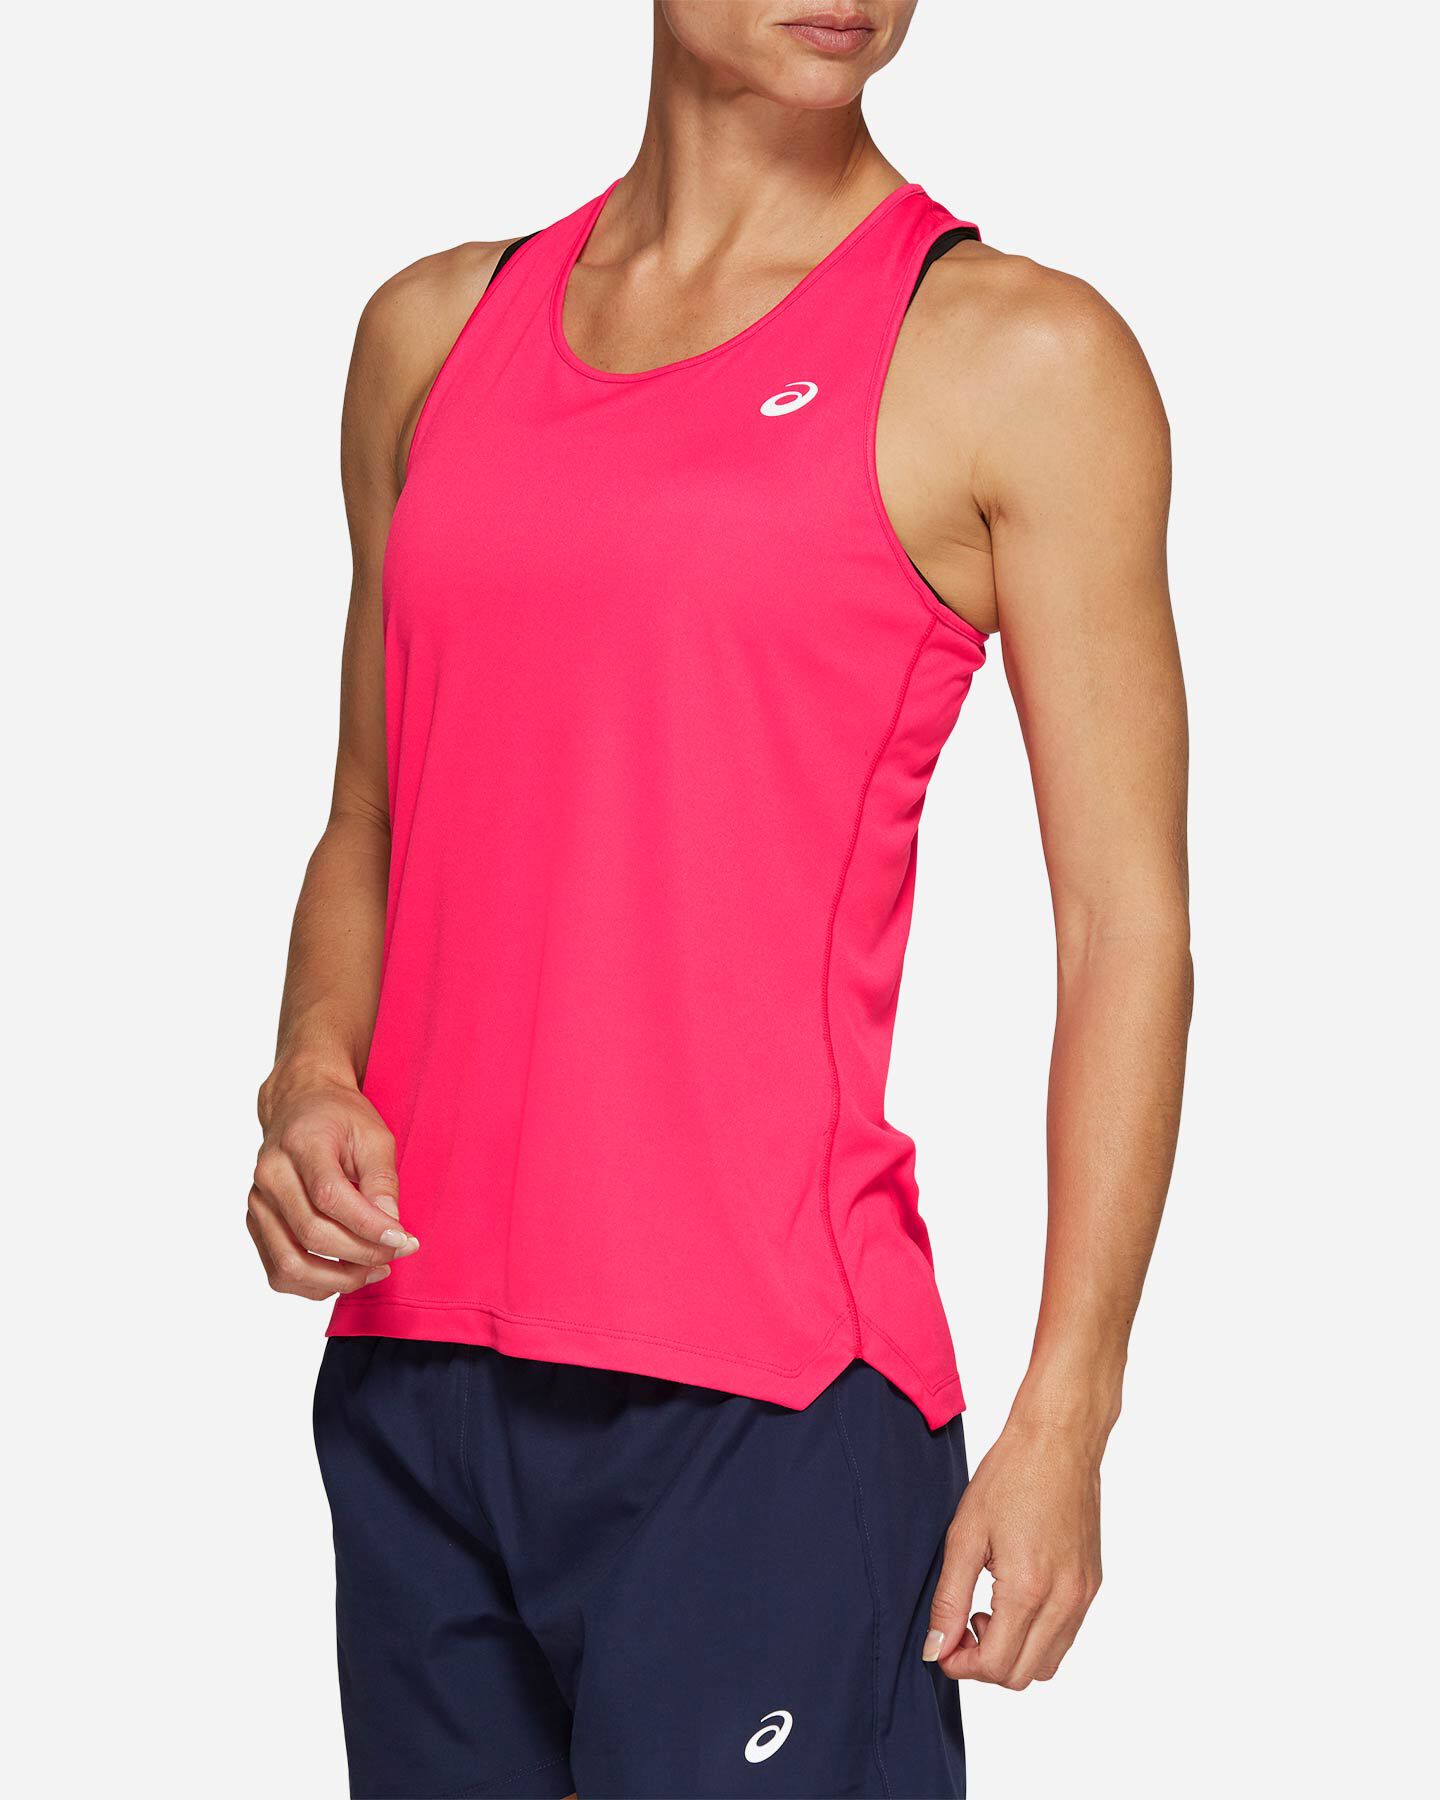  Canotta running ASICS TANK PINK FLUO W S5159552|704|XS scatto 0